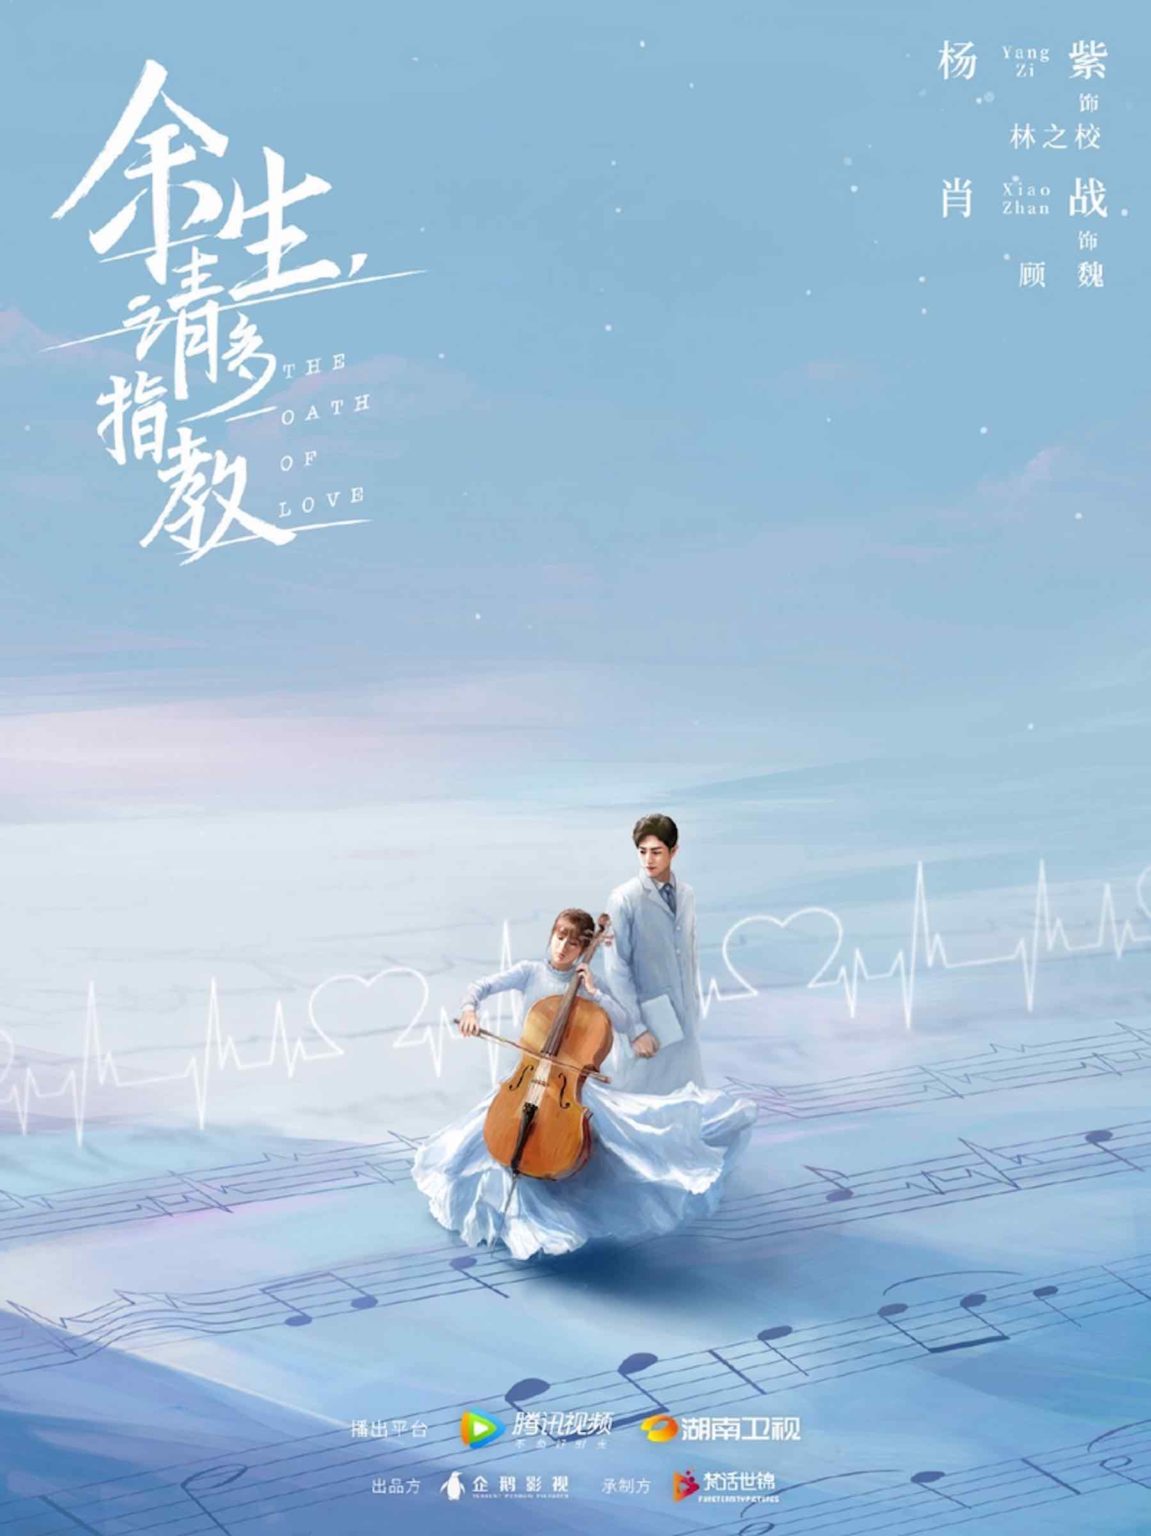 Been getting a little twitchy waiting for your next Xiao Zhan fix? Us too! We’ve compiled everything we can find out about Xiao Zhan’s 'Oath of Love'.